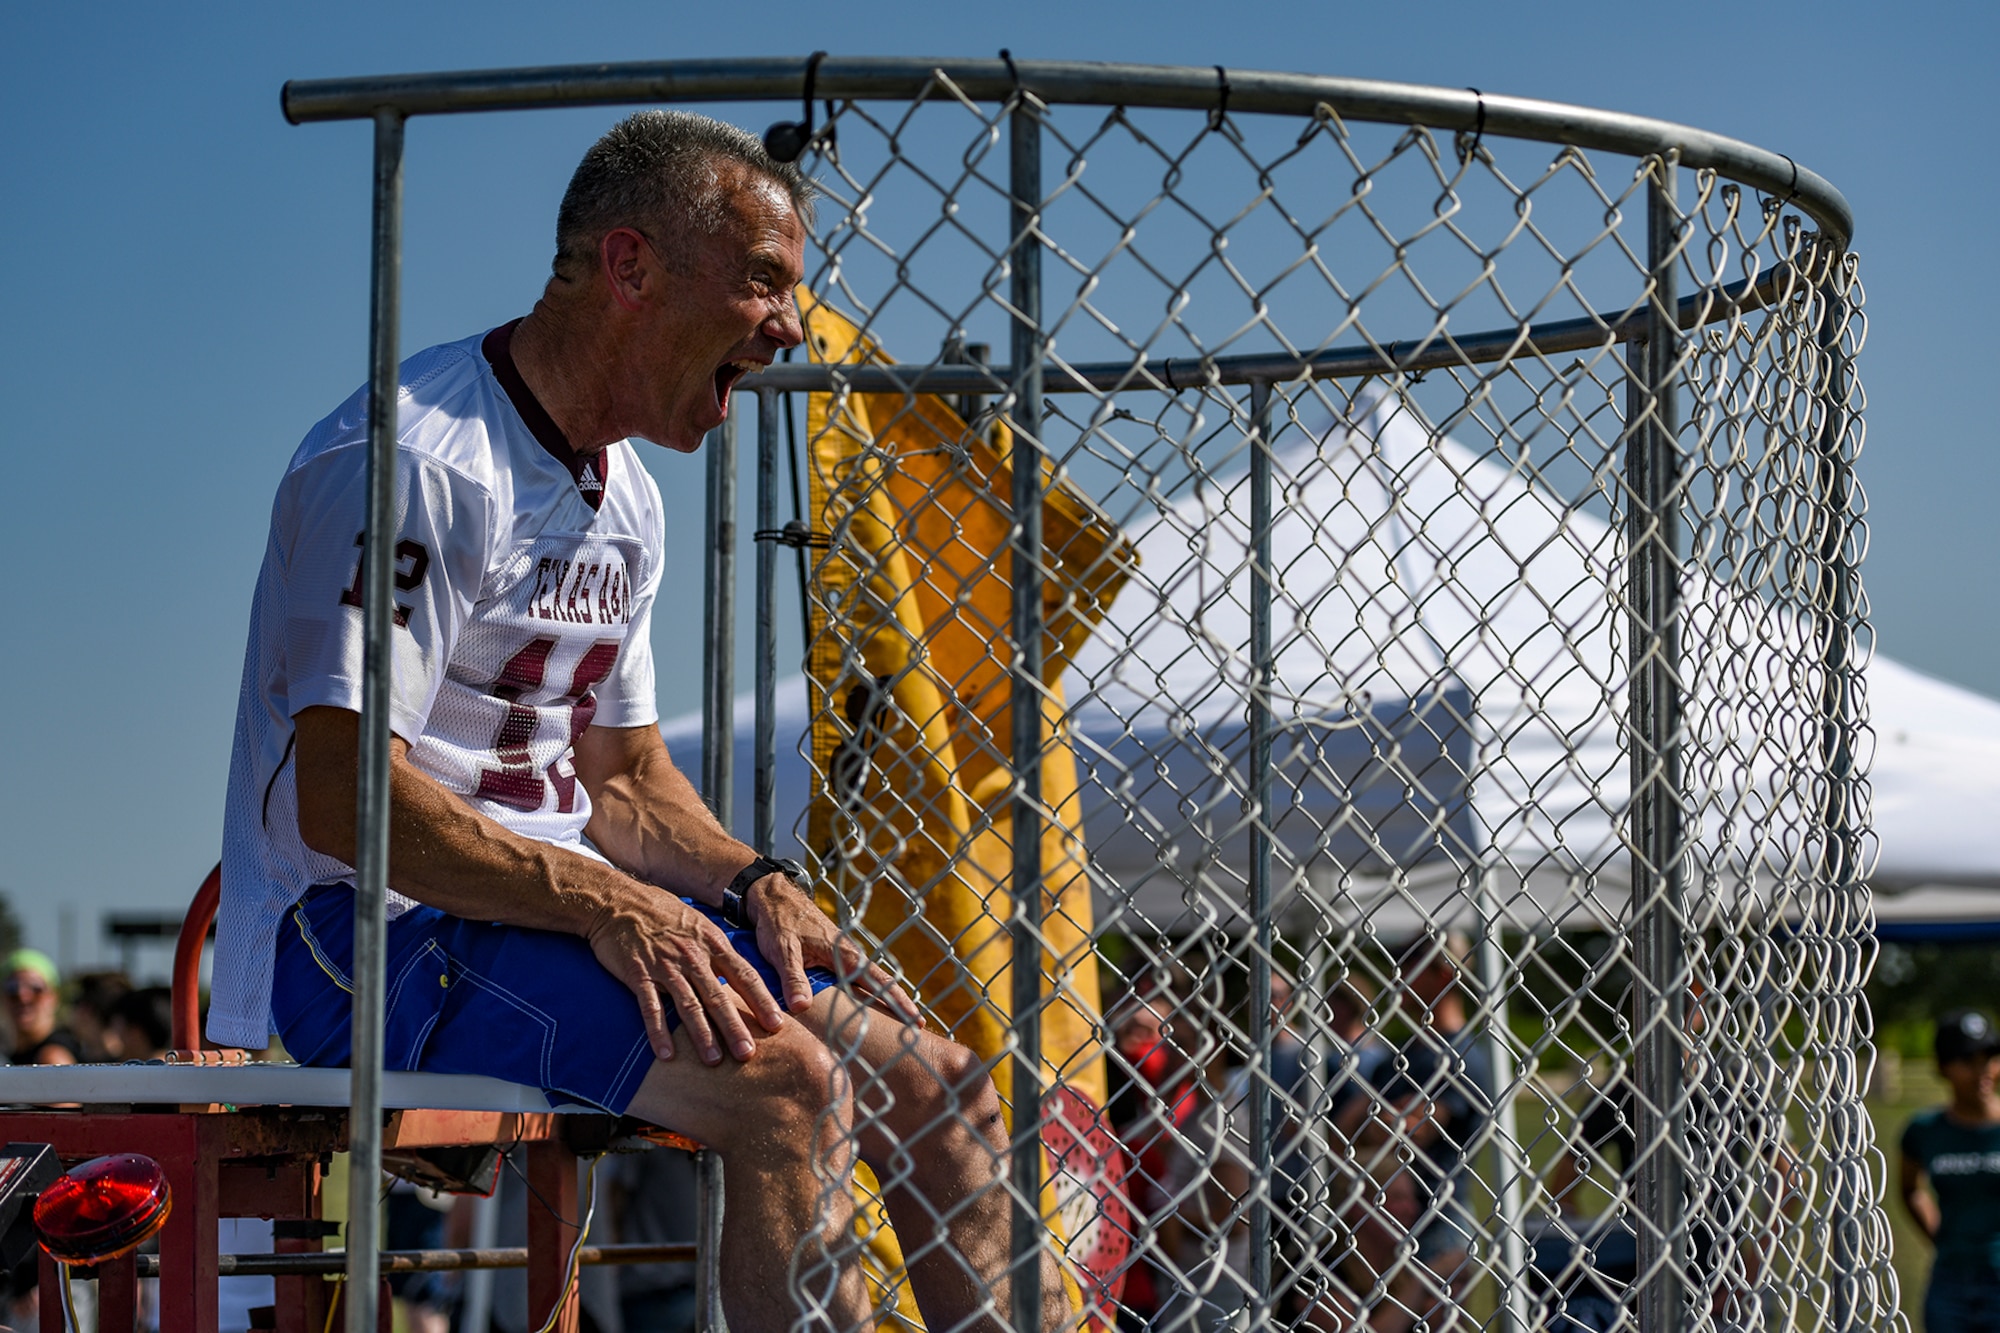 U.S. Air Force Col. Steven Vandewalle, 17th Medical Group commander, taunts a dunk tank contender during the Combined Federal Campaign kickoff tailgate party at the parade field on Goodfellow Air Force Base, Texas, Sept. 8, 2016. The dunk tank, along with several other activities, brought in hundreds of Goodfellow members to kick off the CFC. This year’s goal for the 17th Training Wing is to raise $117,000 for the campaign. (U.S. Air Force photo by Senior Airman Devin Boyer/Released)